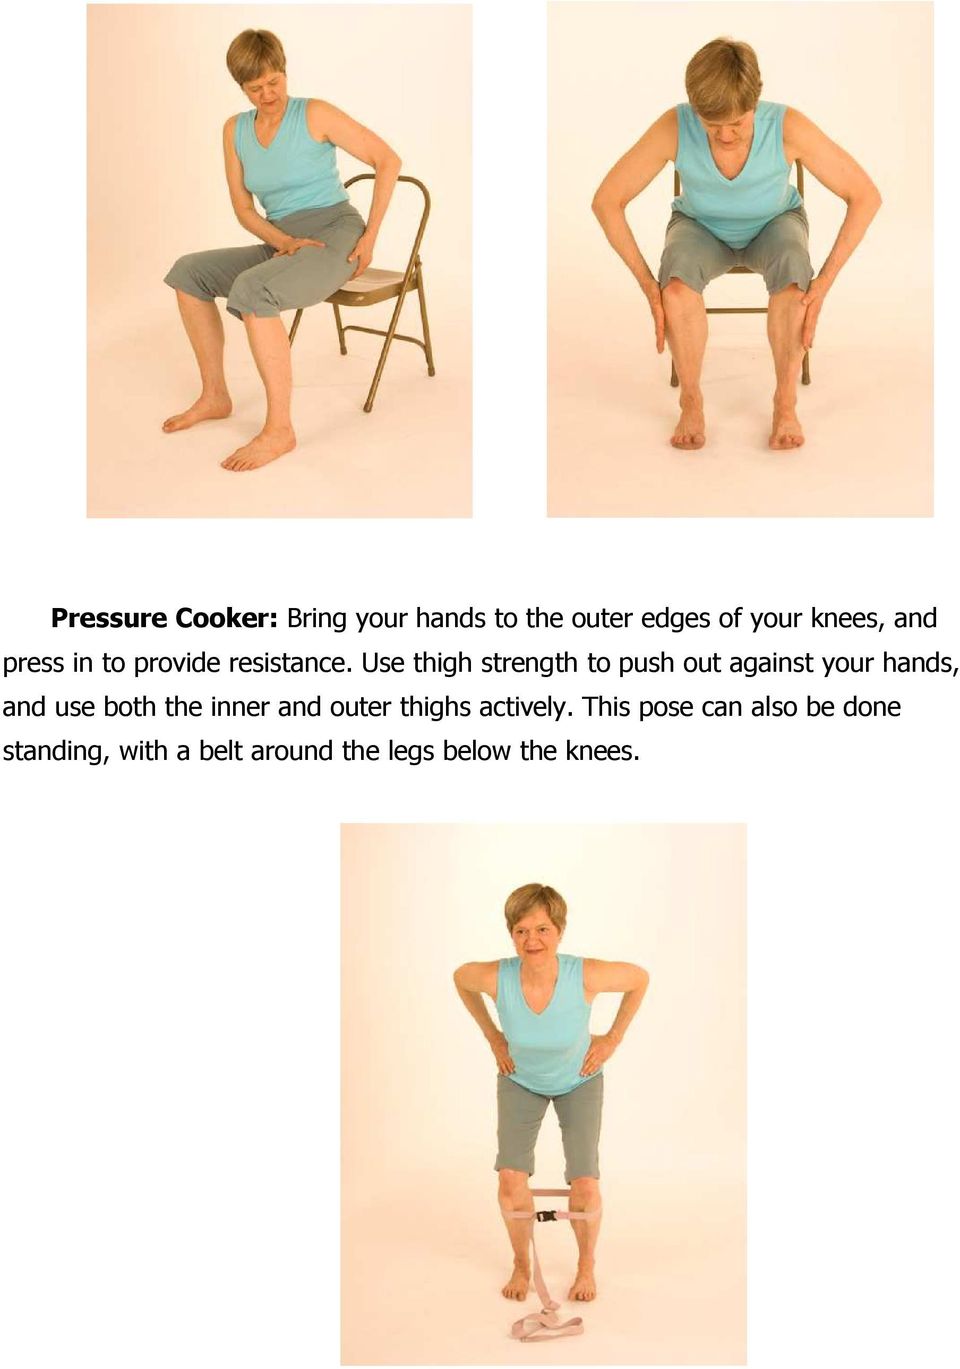 Use thigh strength to push out against your hands, and use both the